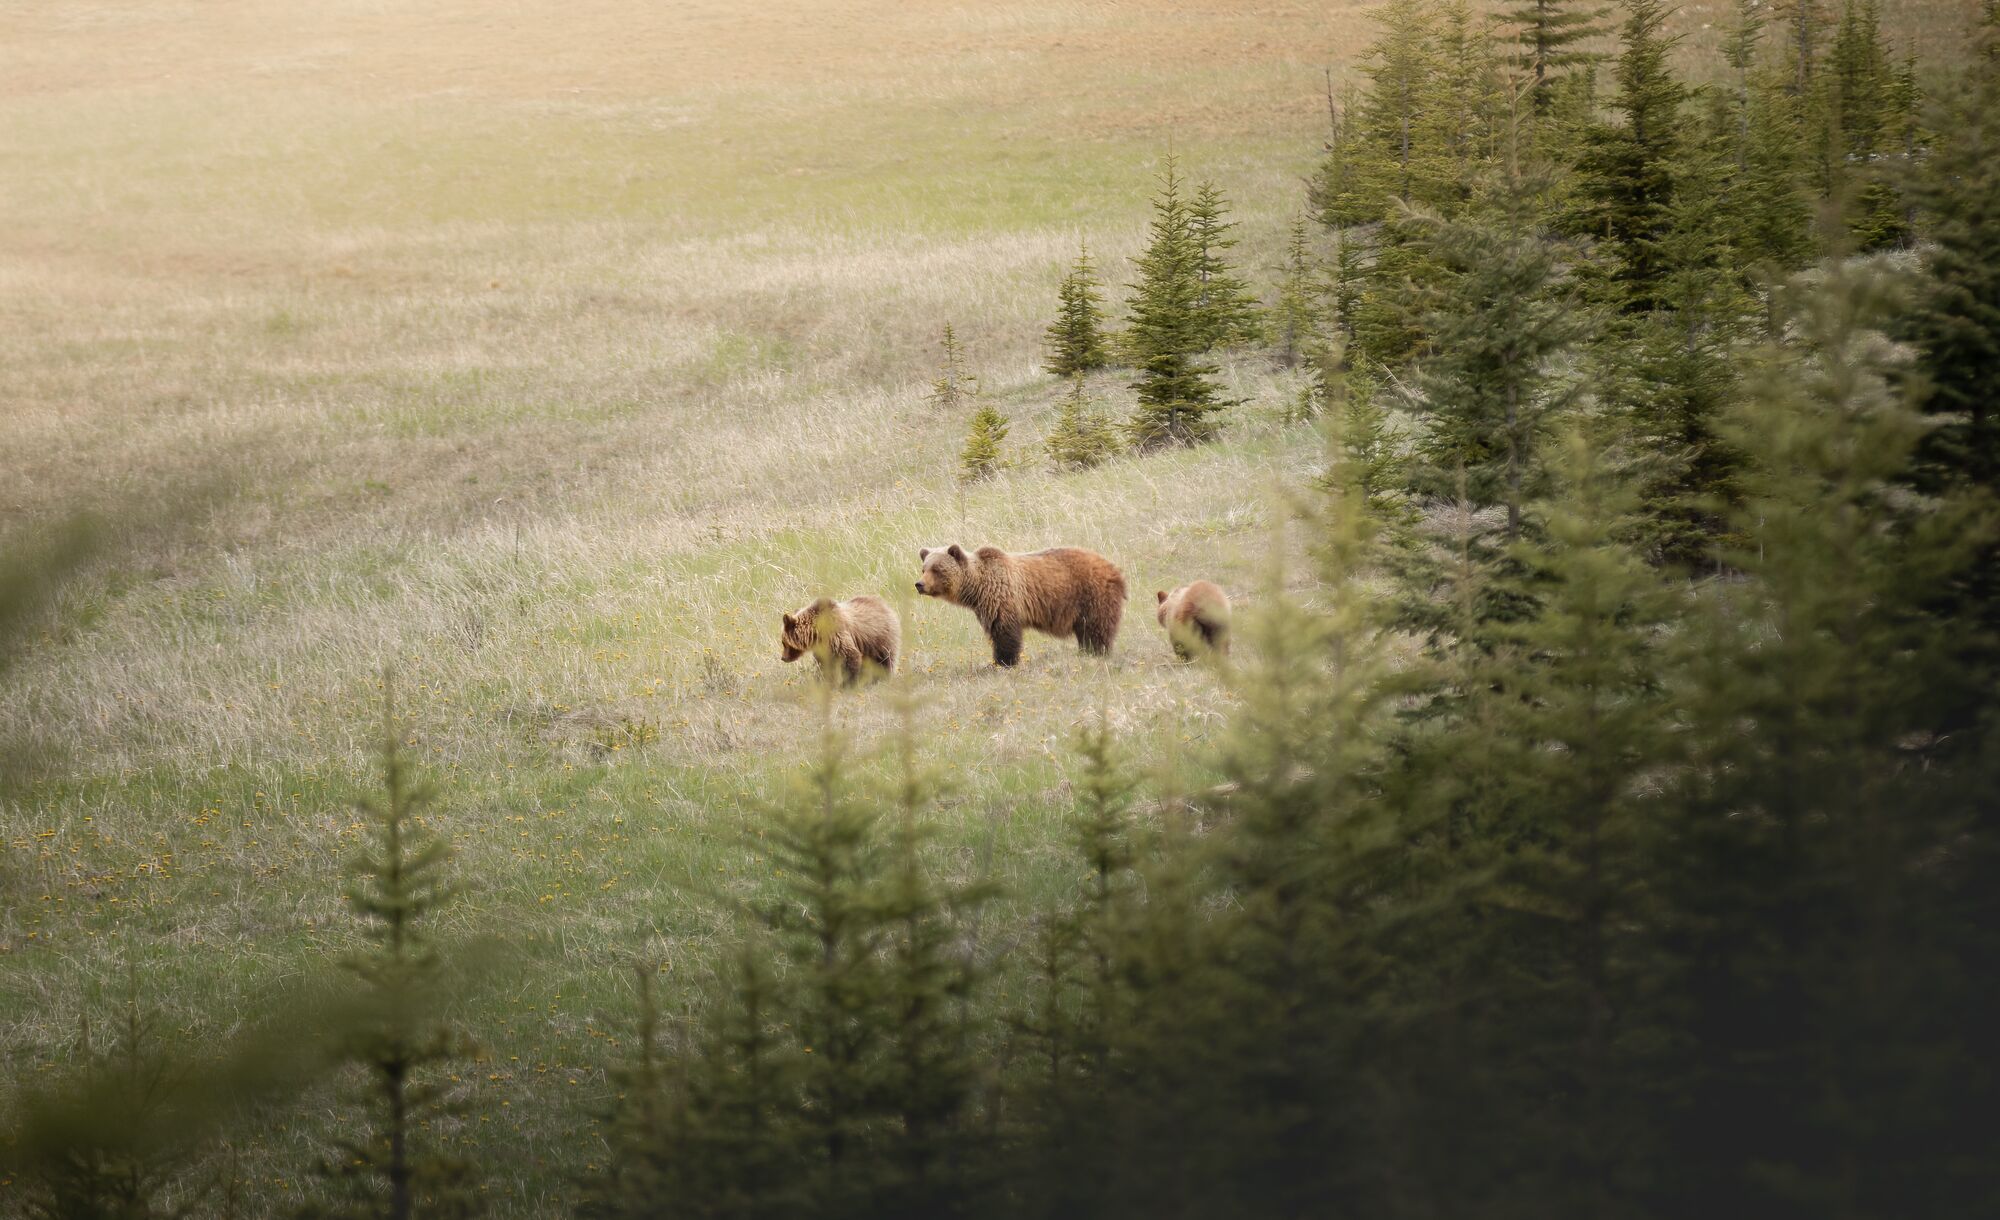 A mama bear and her cubs in a field a long way away in Banff National Park.